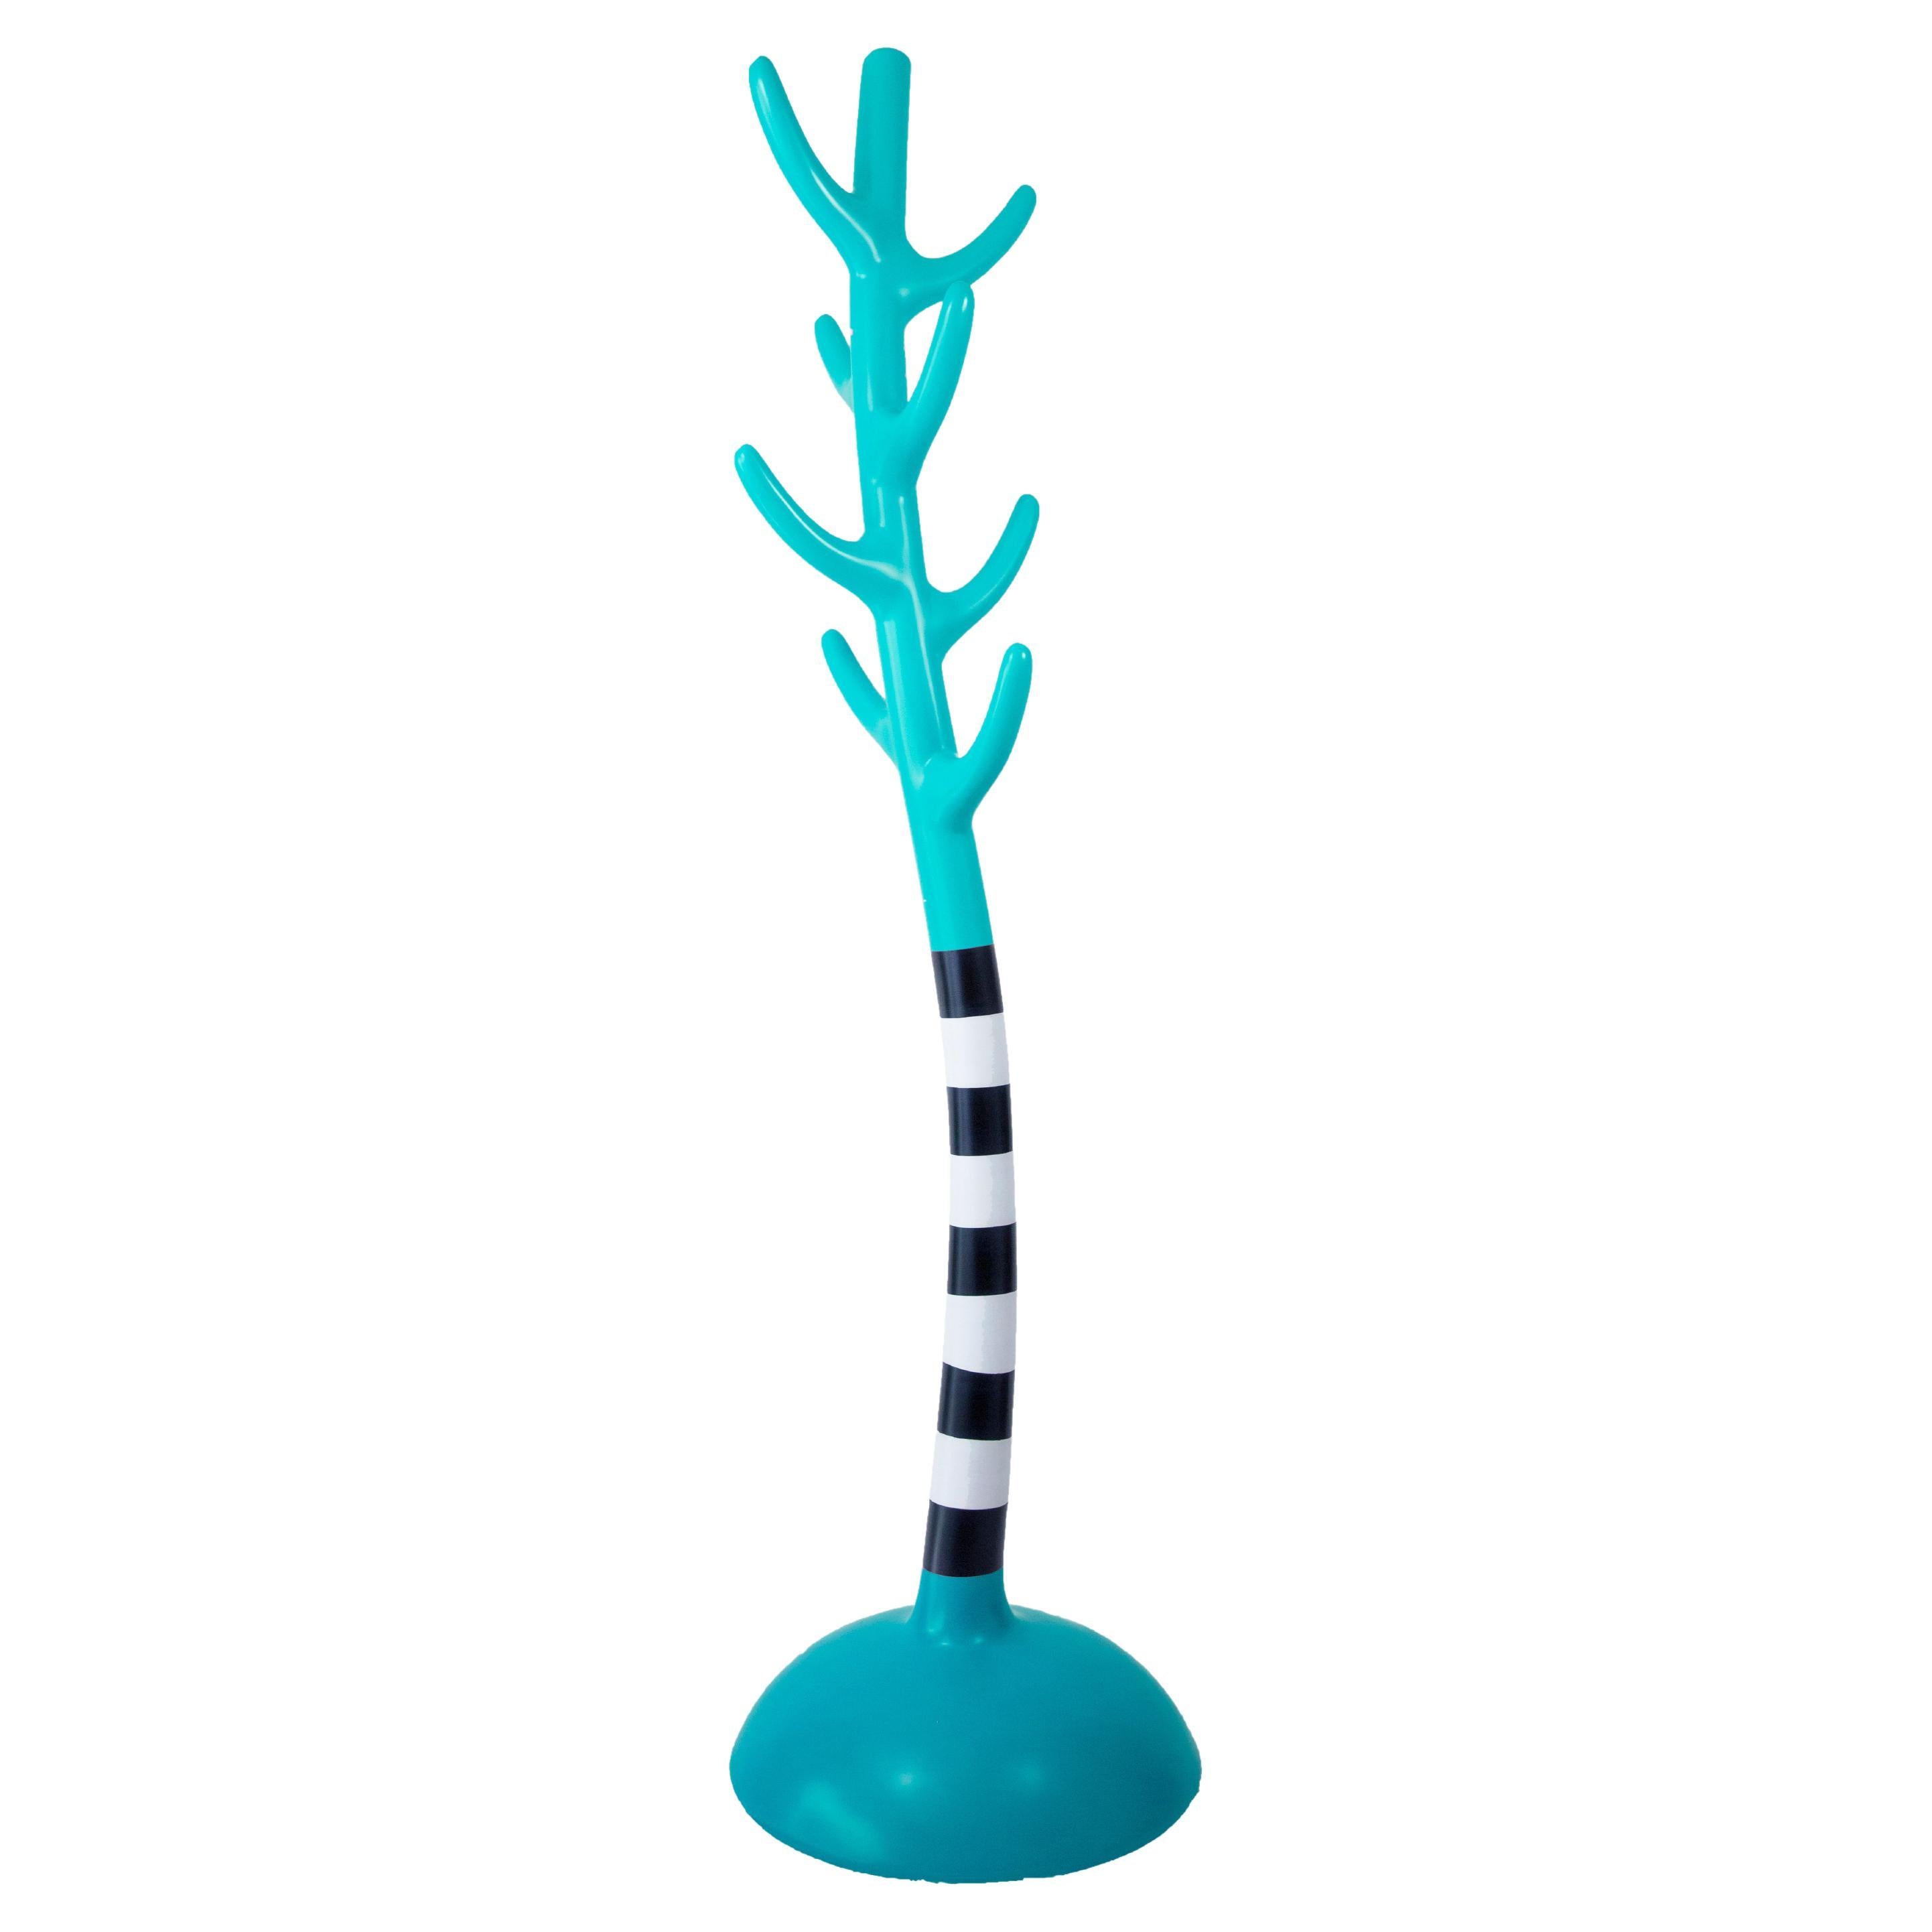 Crooked Turquoise Colourful Coat Rack, Amorphous Sculpture, Artistic For Sale